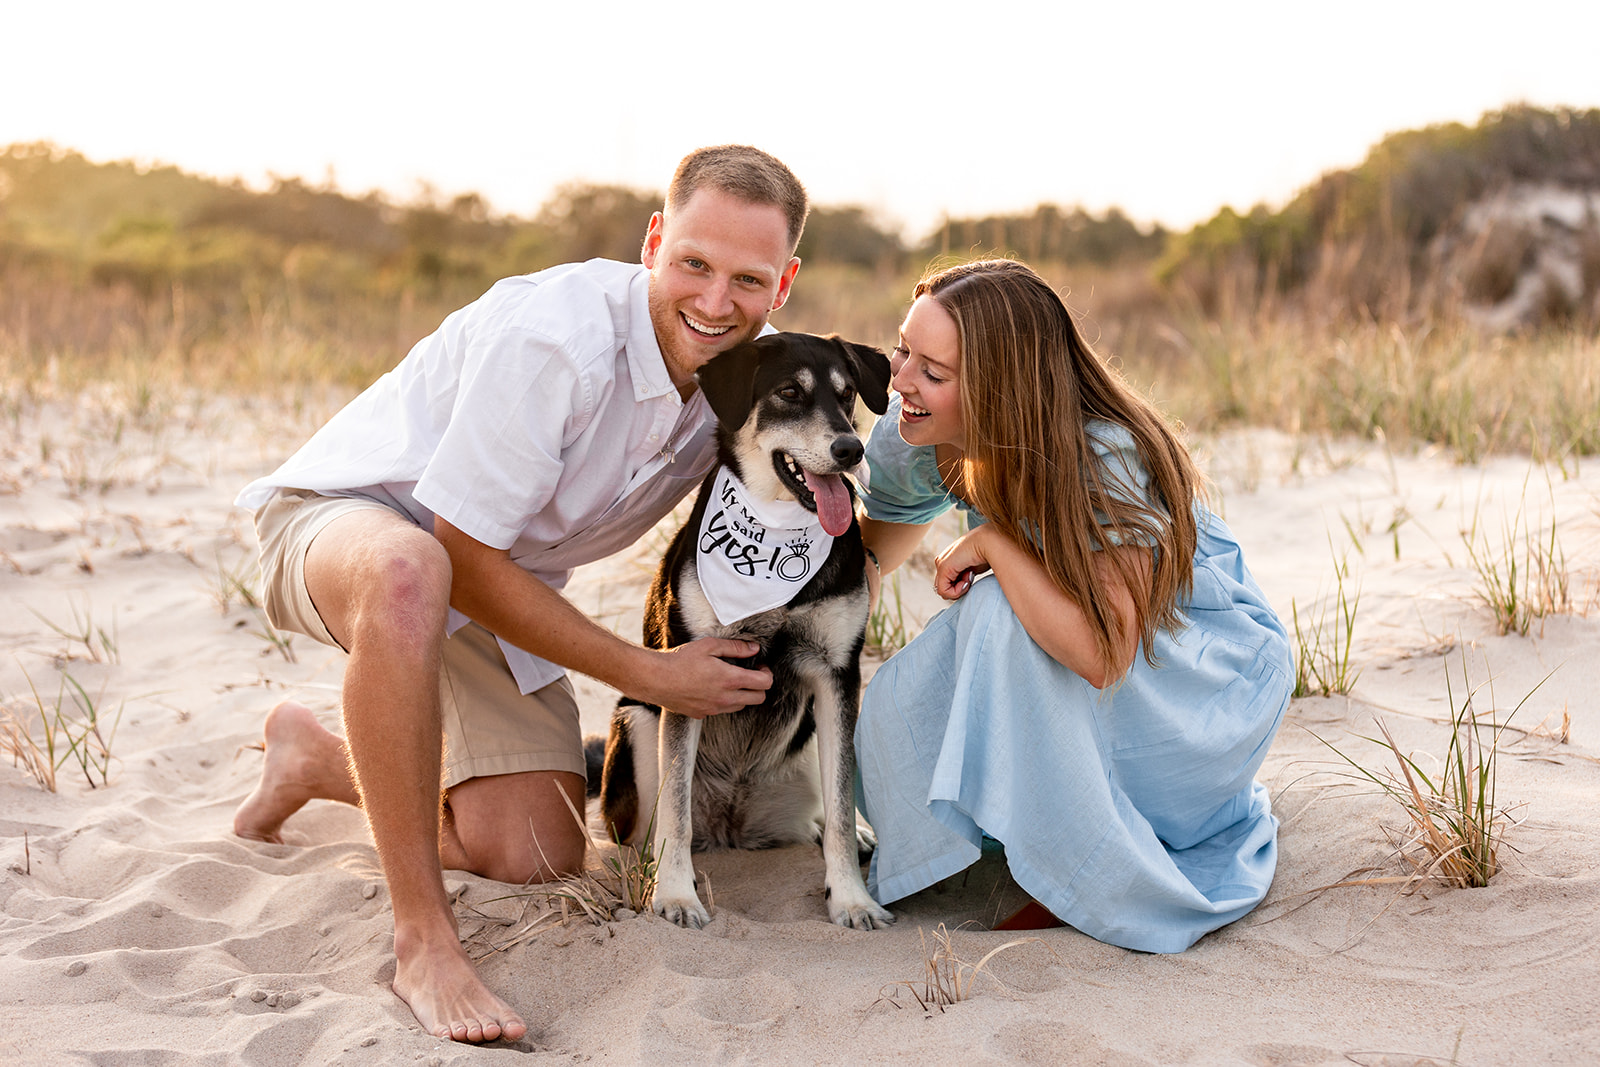 sunset beach proposal with dog and bandana: my mommy said yes!